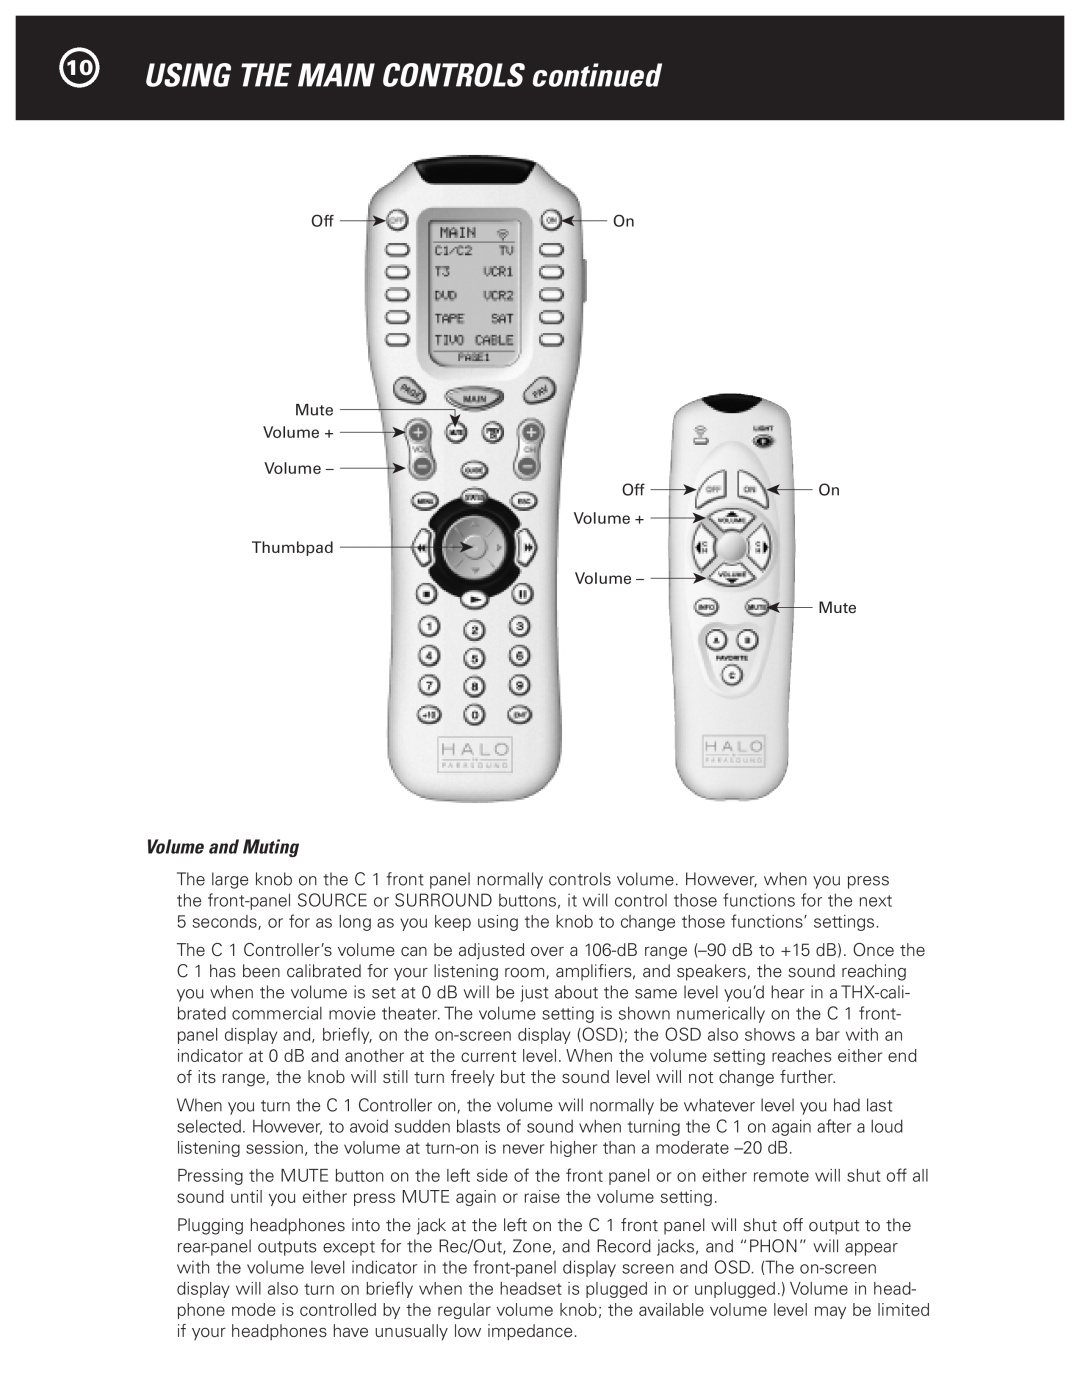 Parasound Halo C1 Controller manual 10USING THE MAIN CONTROLS continued, Volume and Muting 